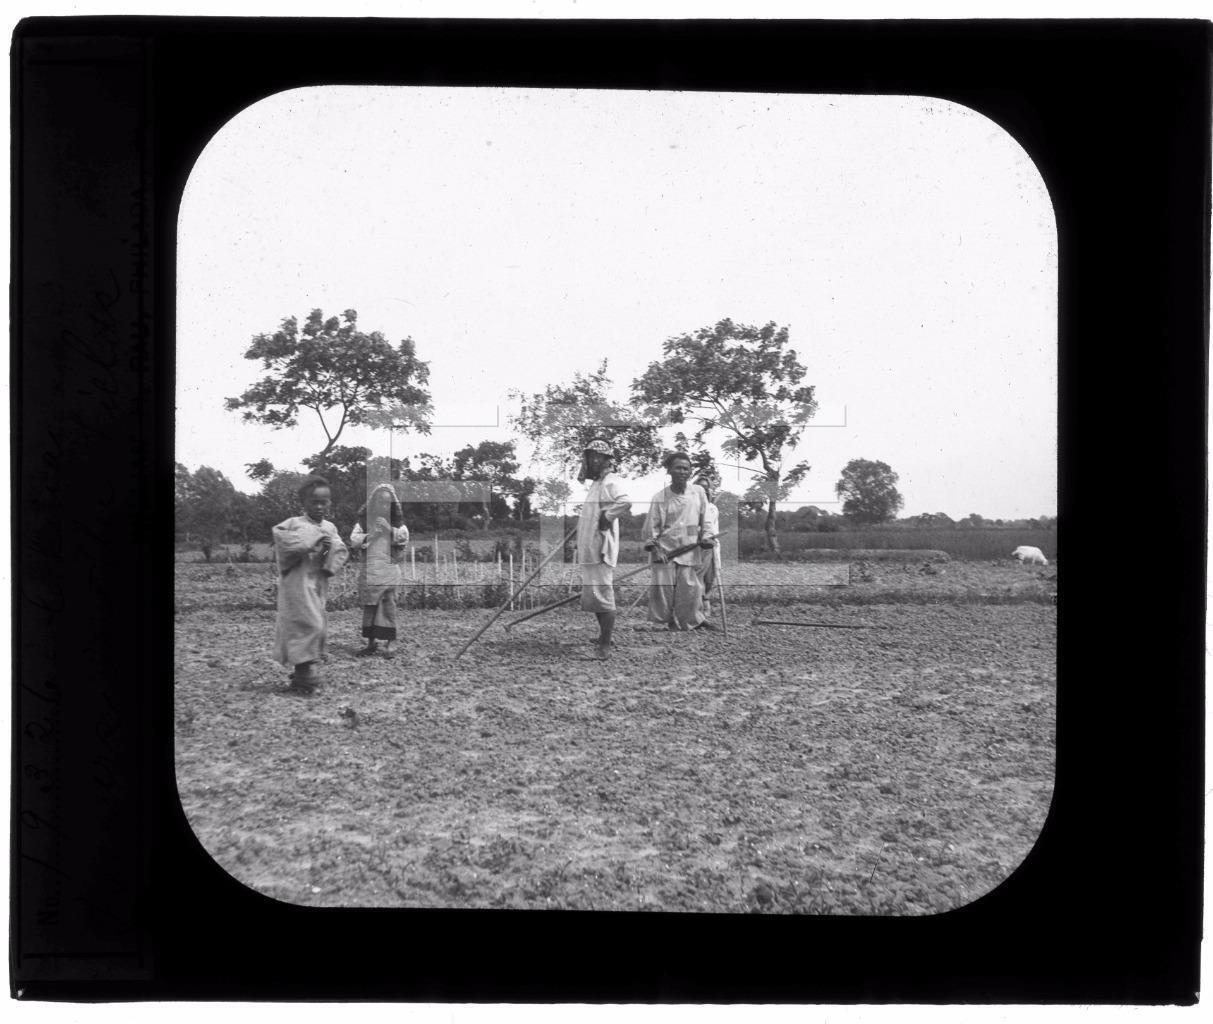 1929 Chinese Farmers in the Field China OLD GLASS PHOTO MAGIC LANTERN SLIDE 422A